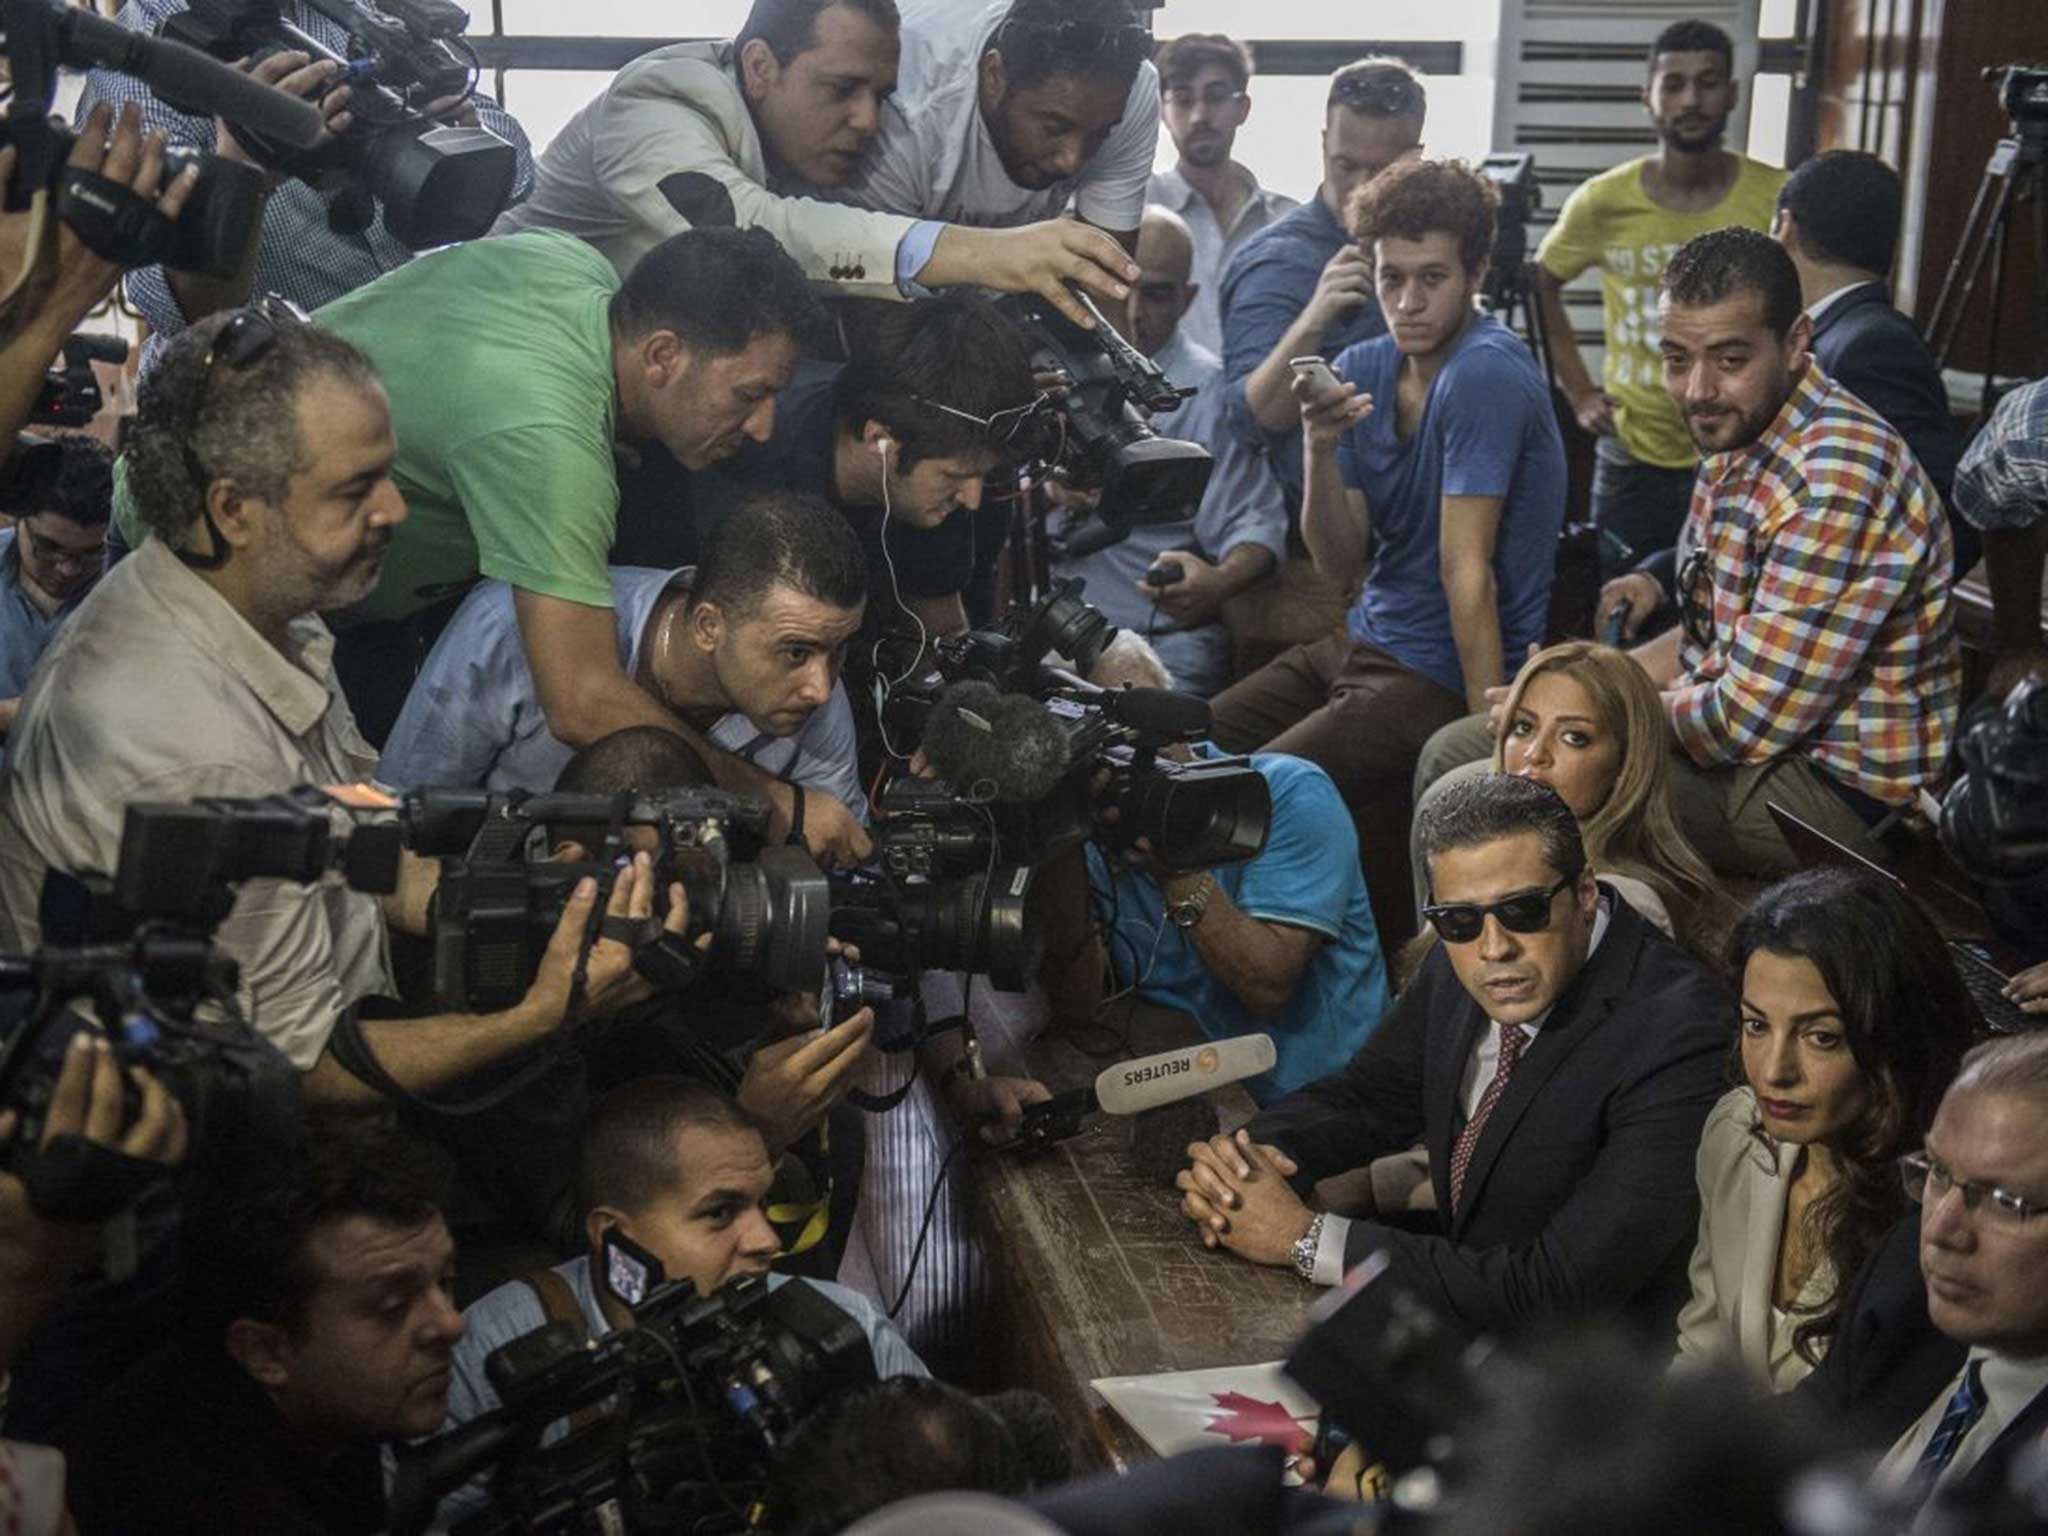 International media forms a scrum around Mohammad Fahmy, wife Mawra and their lawyer Amal Clooney in the court